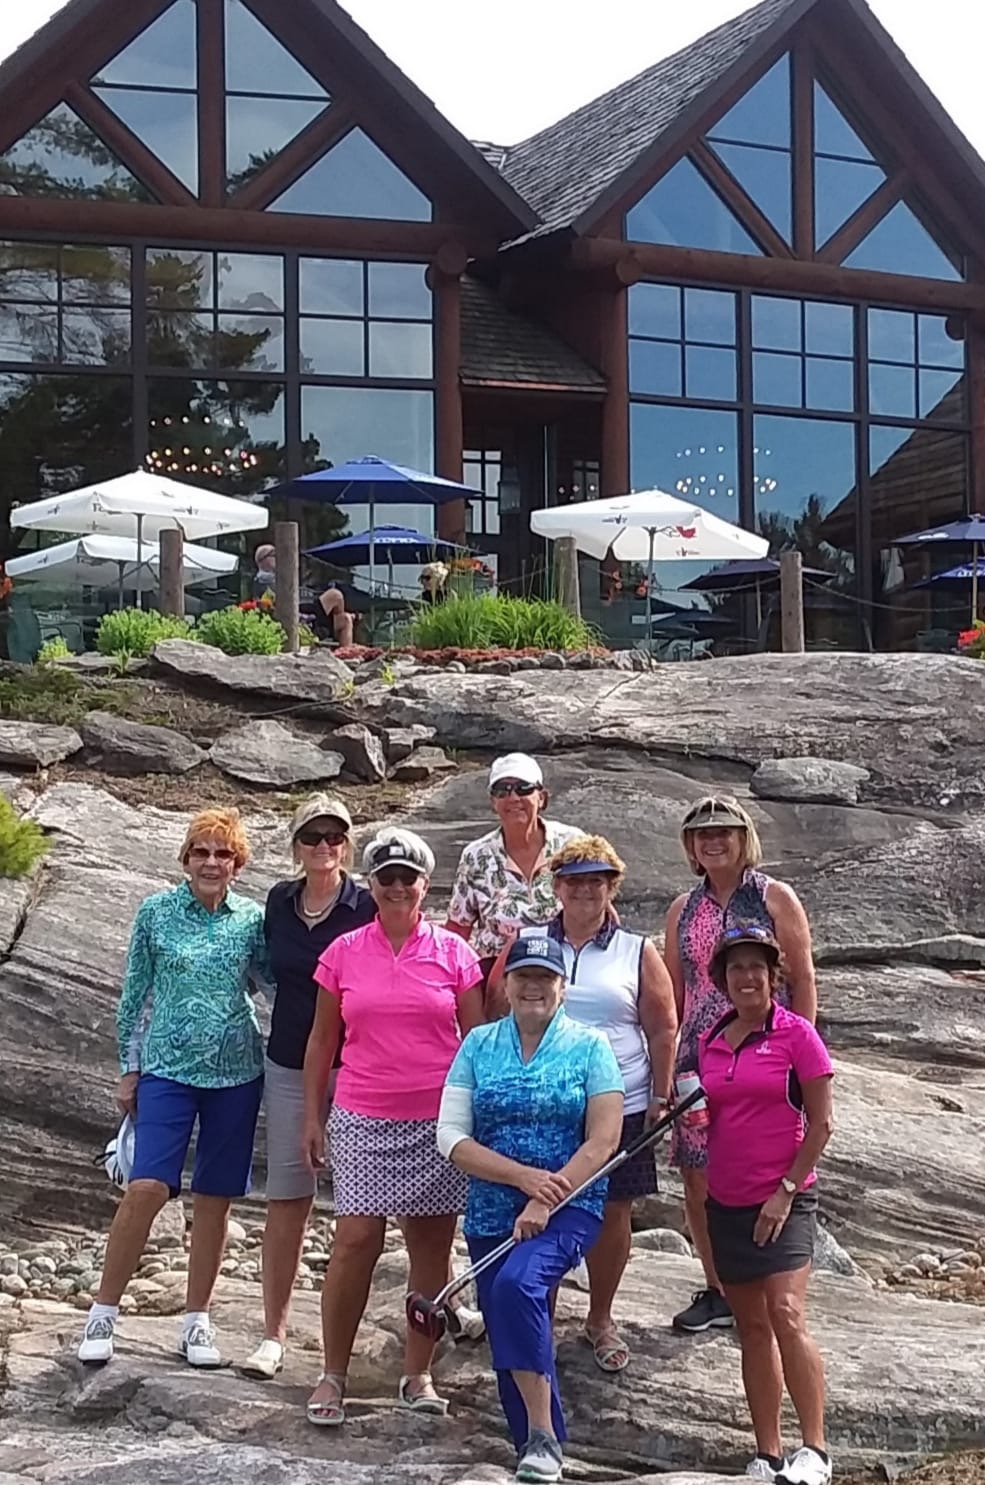 This picture was taken in July 2019 in Muskoka, Canada. Bev was a great golfer up until the time of her accident. She was always surrounded by her many friends and had a joke ready for a fun time. We all miss her so much.